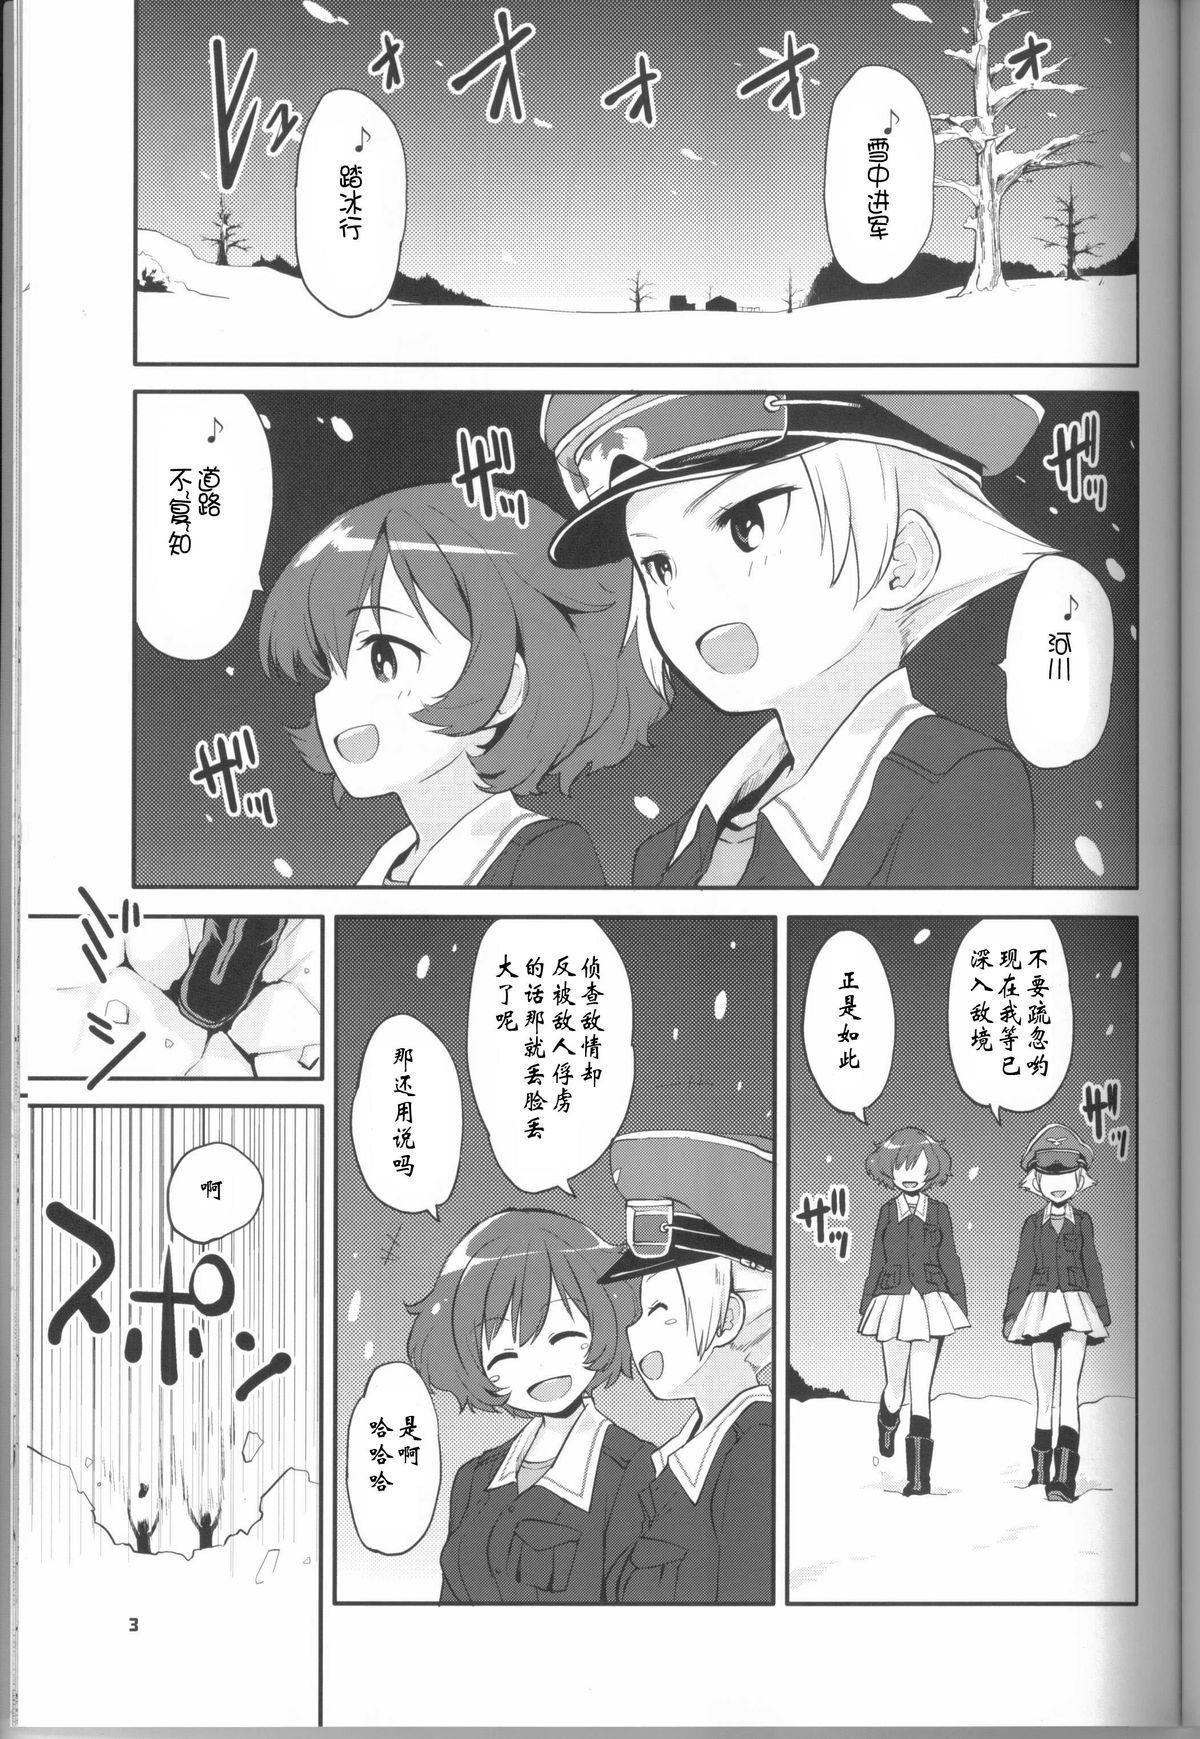 Cum On Pussy The General Frost Has Come! - Girls und panzer Village - Page 2